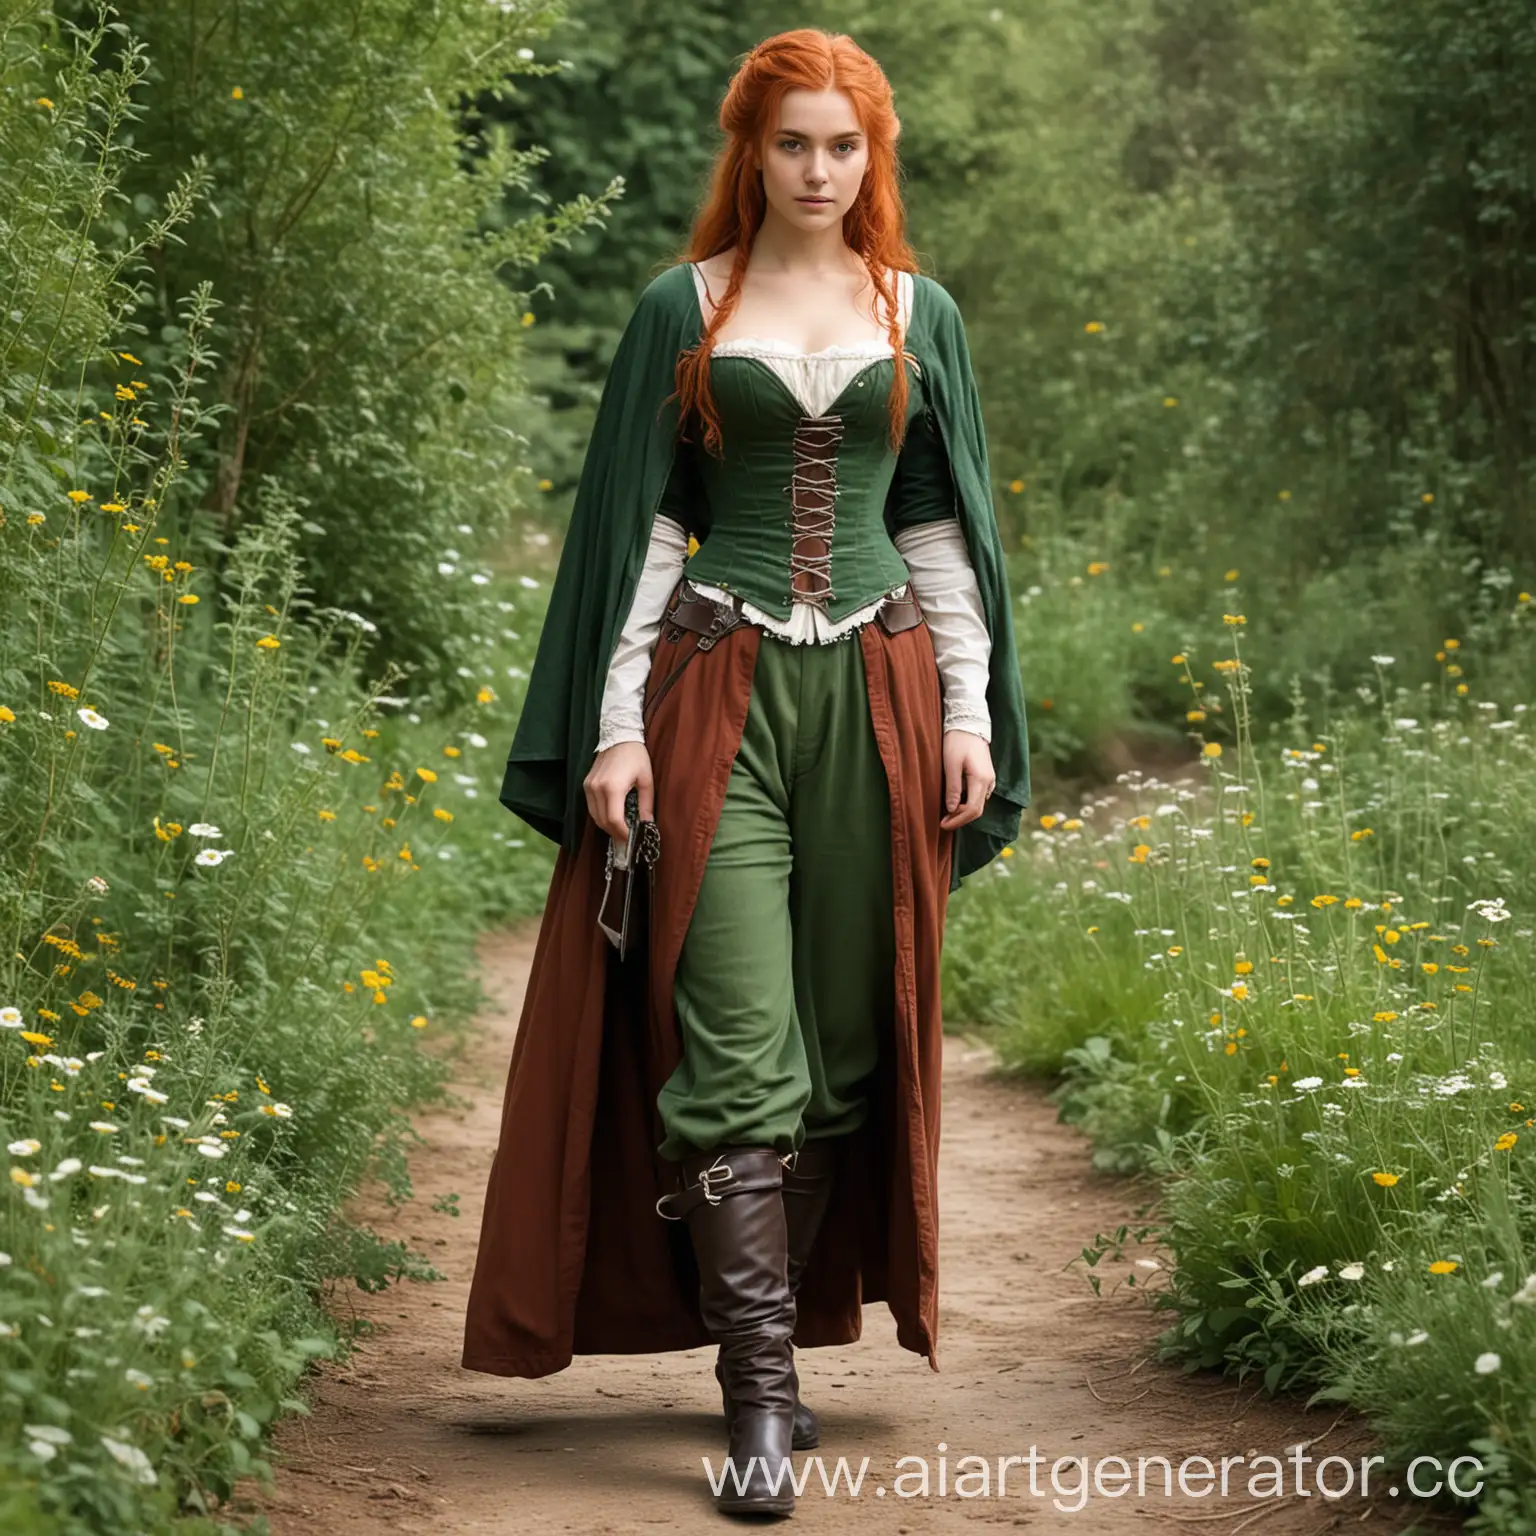 The girl, with the right half of her hair red and the left half white, a herbalist, medieval, full-length, dressed in trousers, a green corset, and a brown cloak. On her waist, there's a belt bag, a notebook, vials, and pouches of herbs.